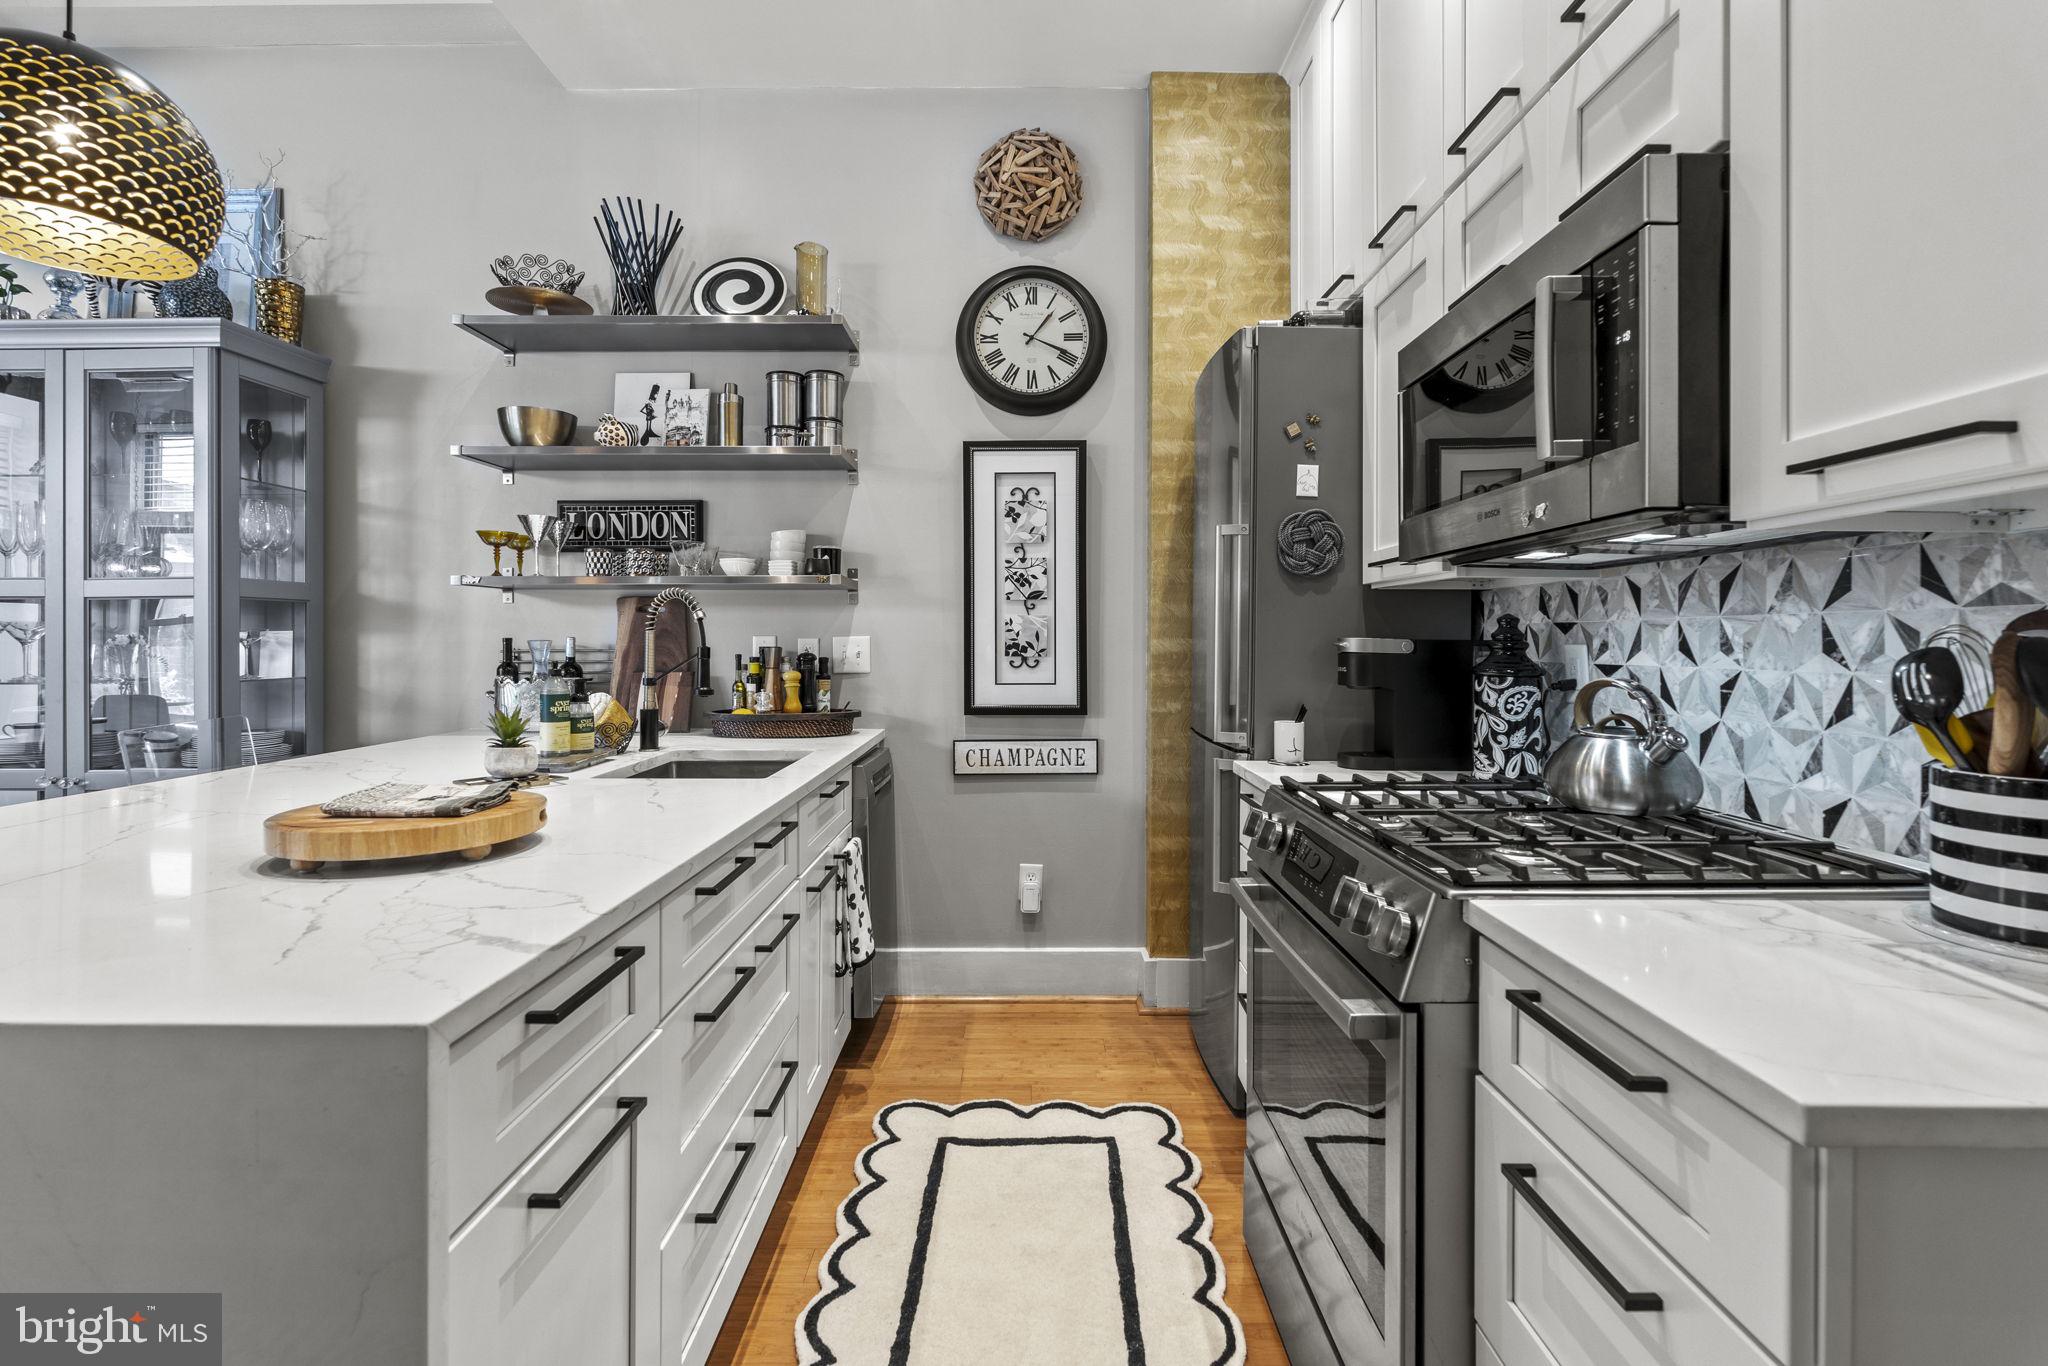 a kitchen with stainless steel appliances granite countertop a stove and a clock on the wall